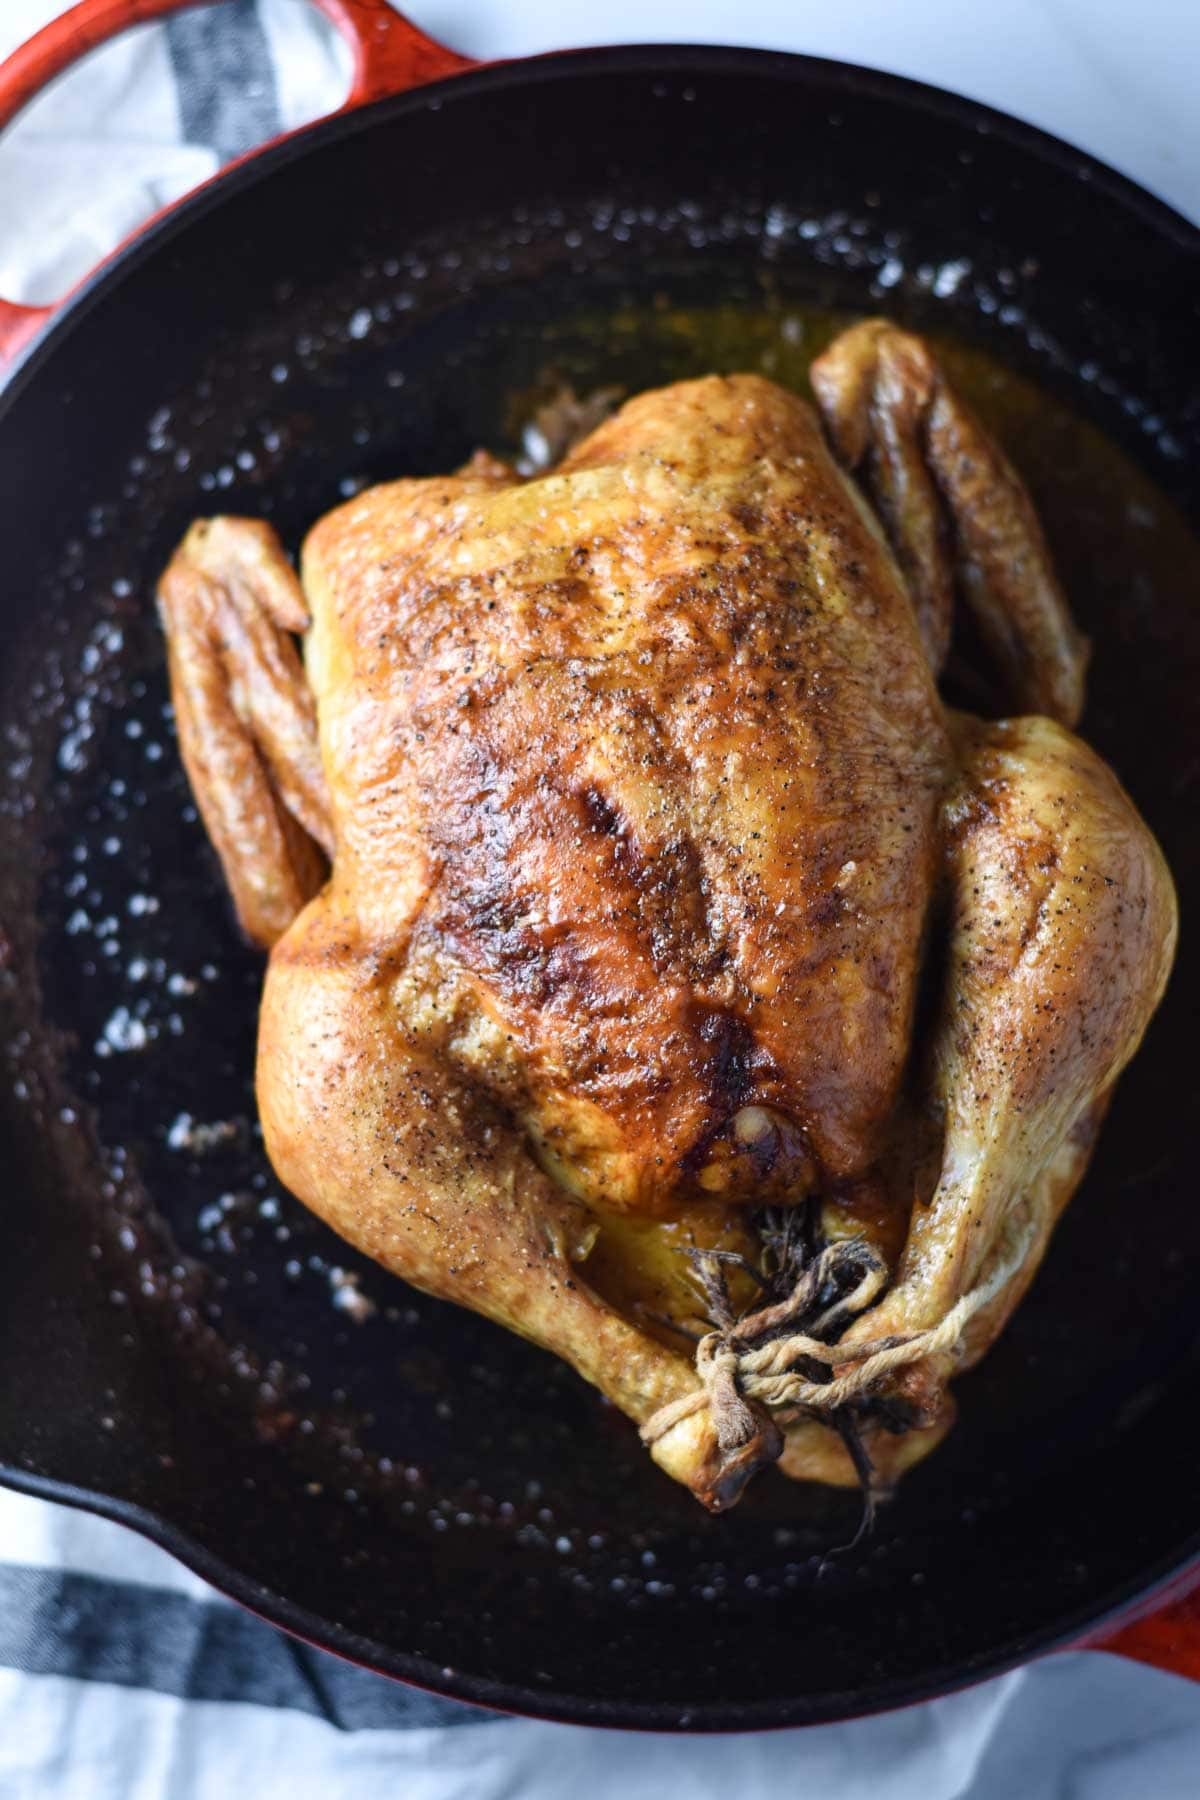 A whole roast chicken in a cast iron pan.